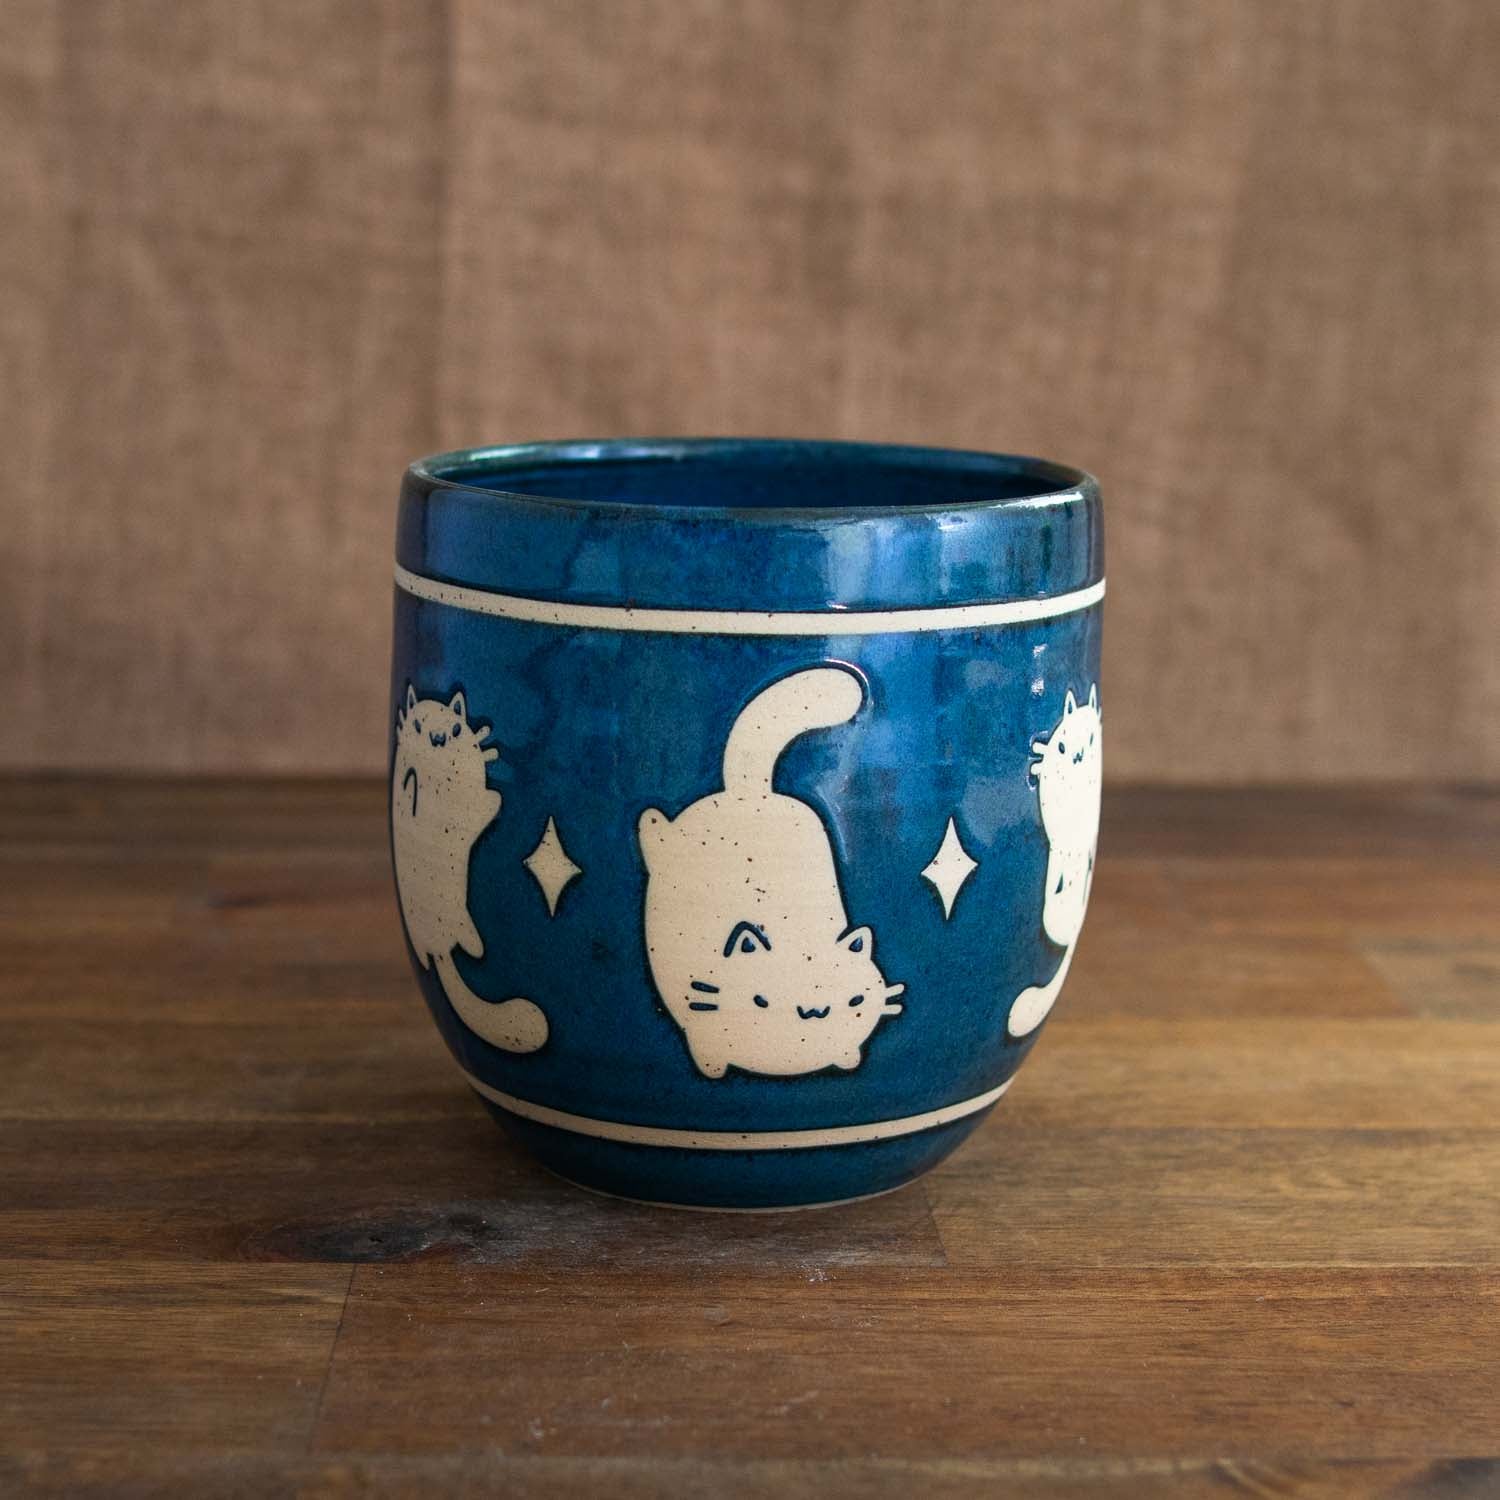 Space cats vase with accent lines